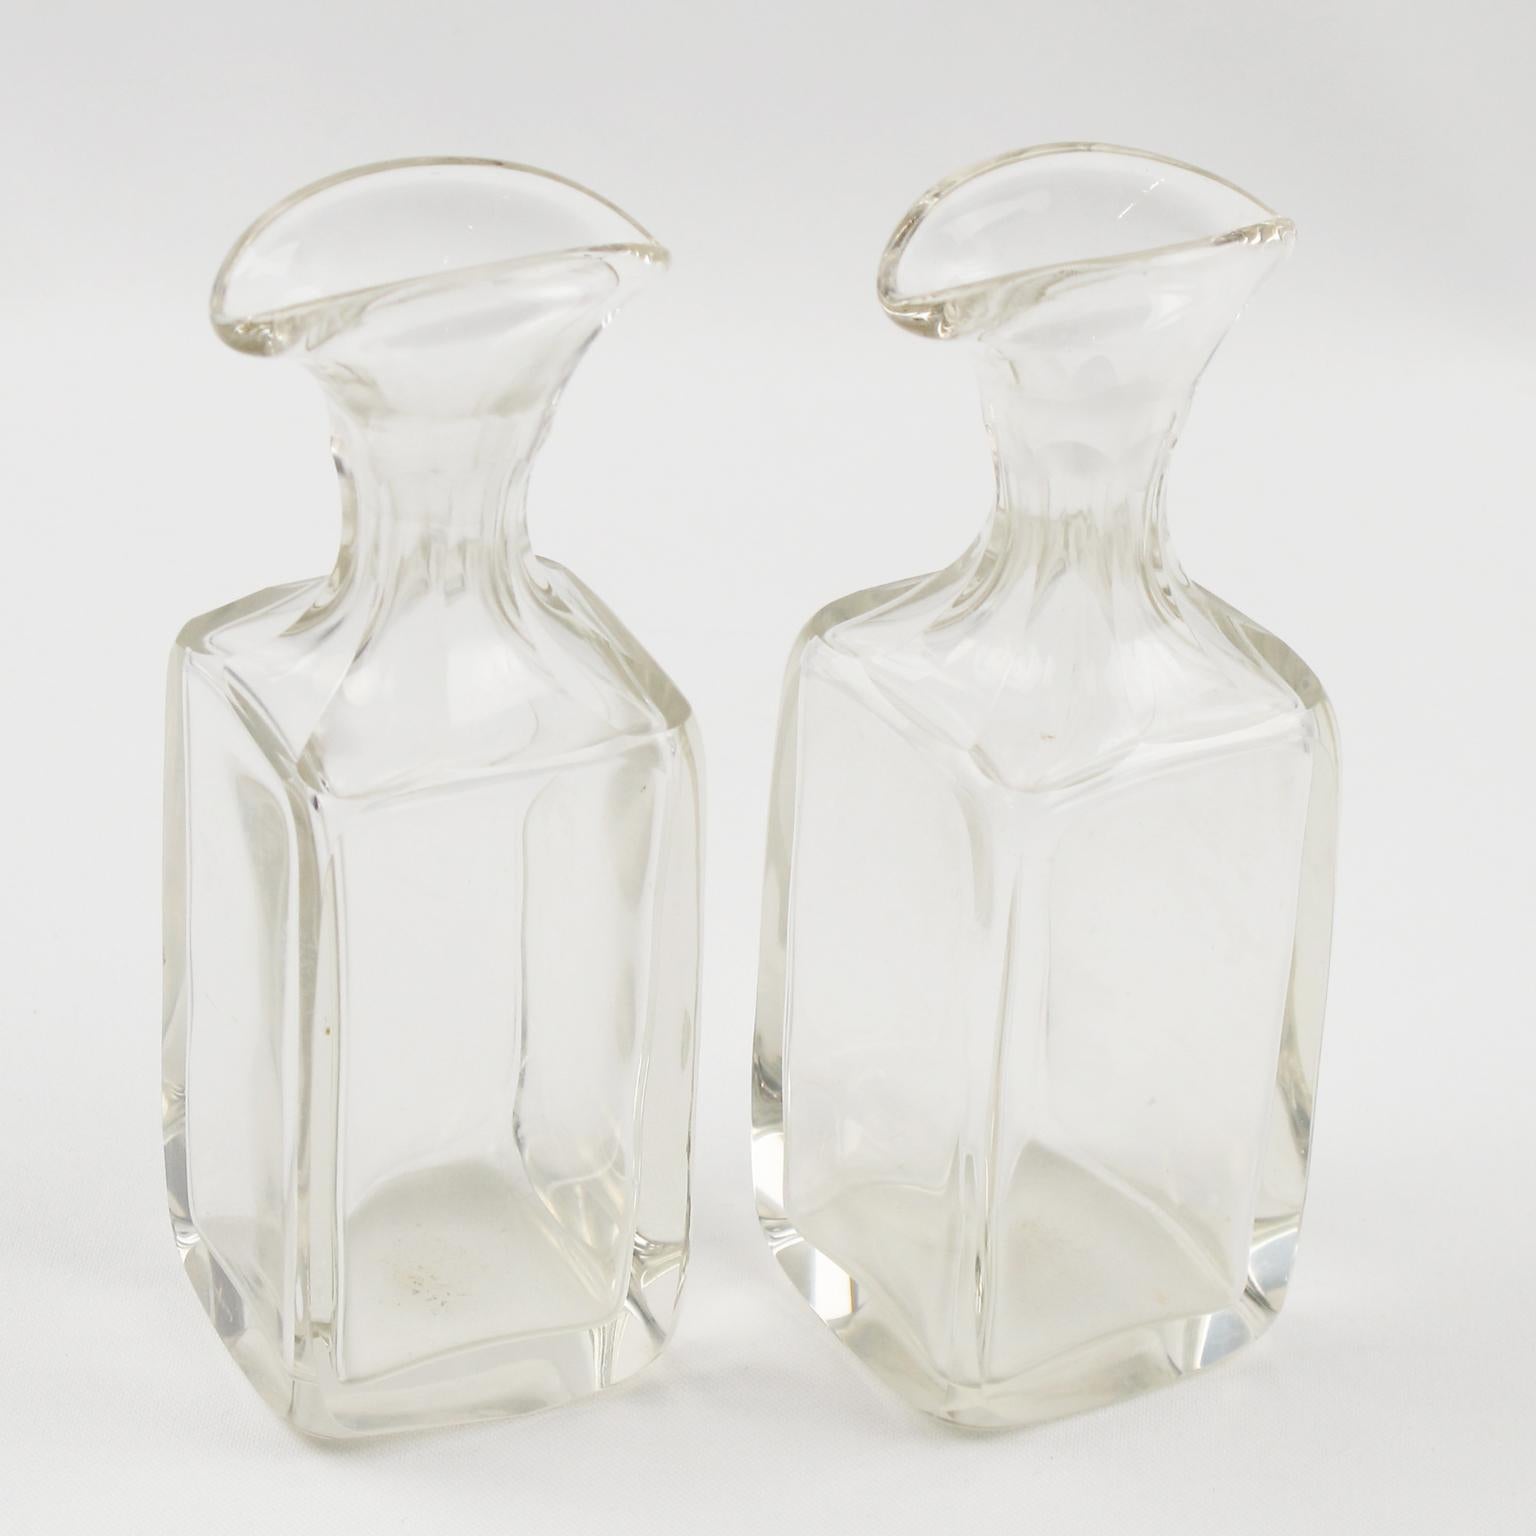 Art Deco Silver Plate and Crystal Oil and Vinegar Cruet Set by Quist, 1930s For Sale 1